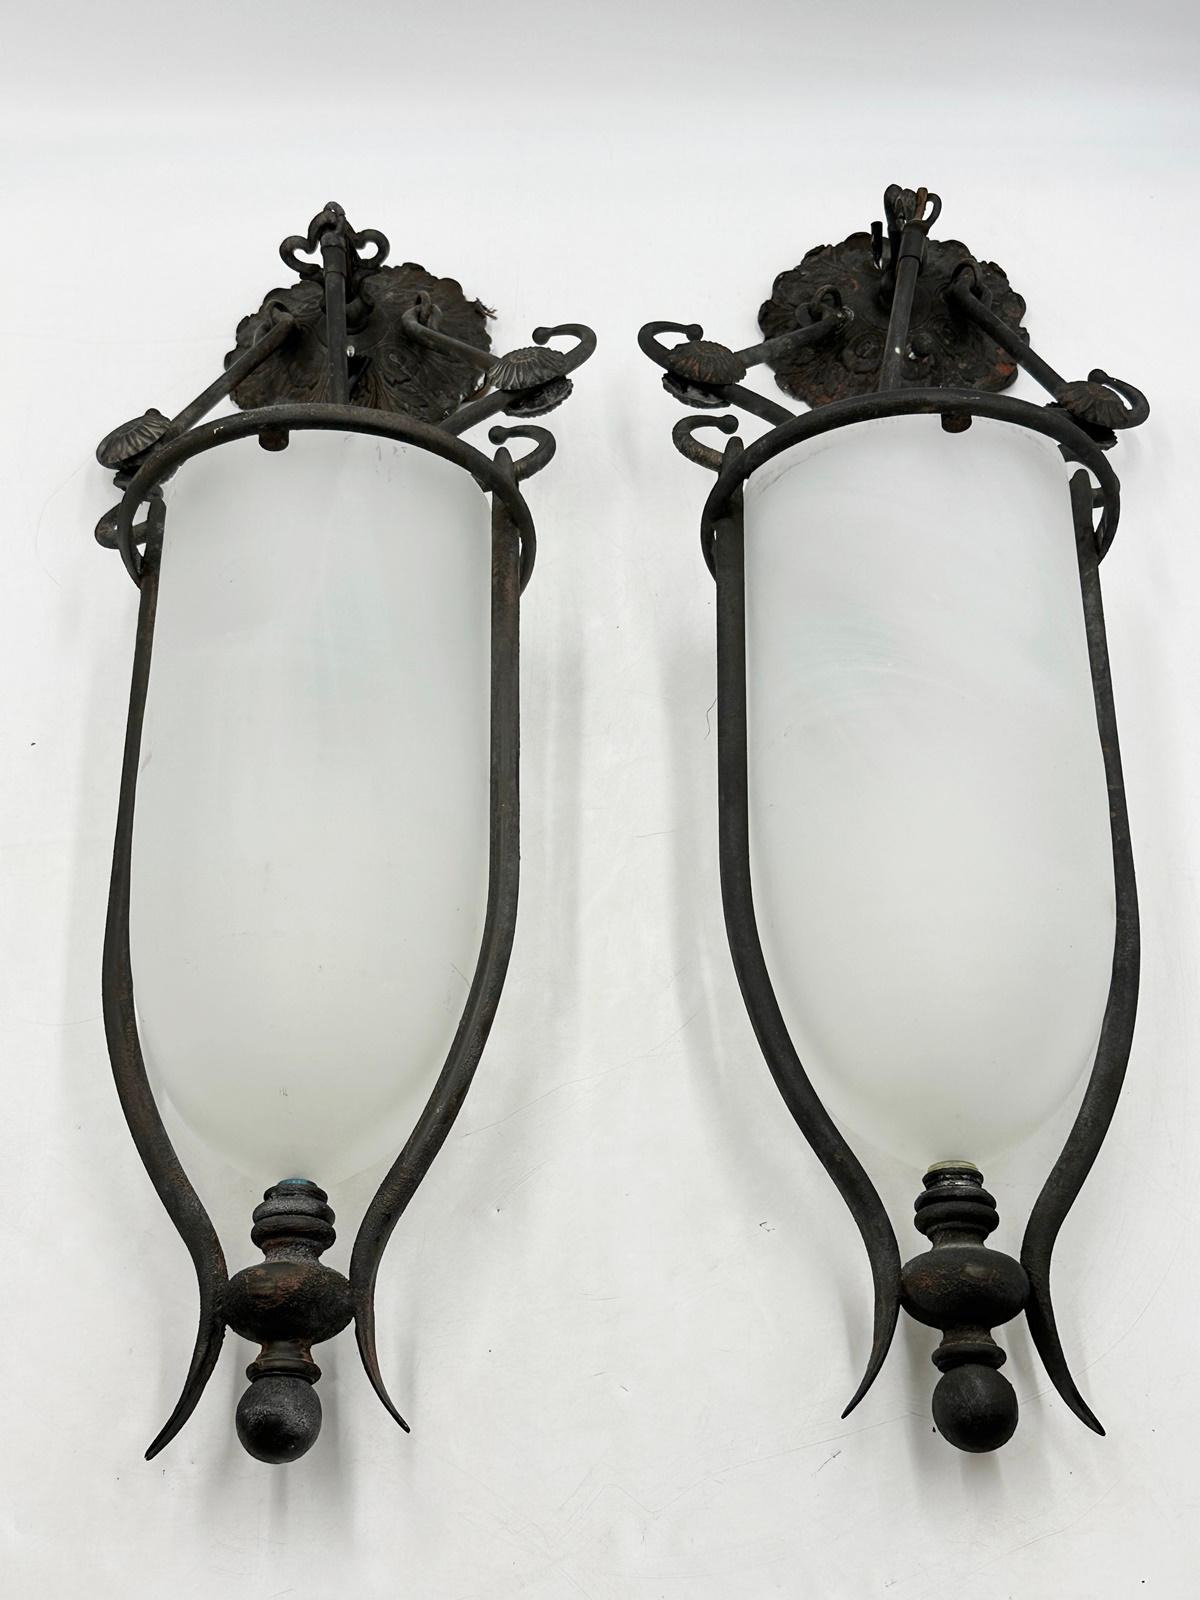 Introducing the exquisite Pair of Glass & Steel Lantern Lights by the esteemed Lantern Masters, USA 2000's. 

These opulent wall lights redefine elegance with their captivating fusion of glass and steel craftsmanship.
 The glass shades, meticulously